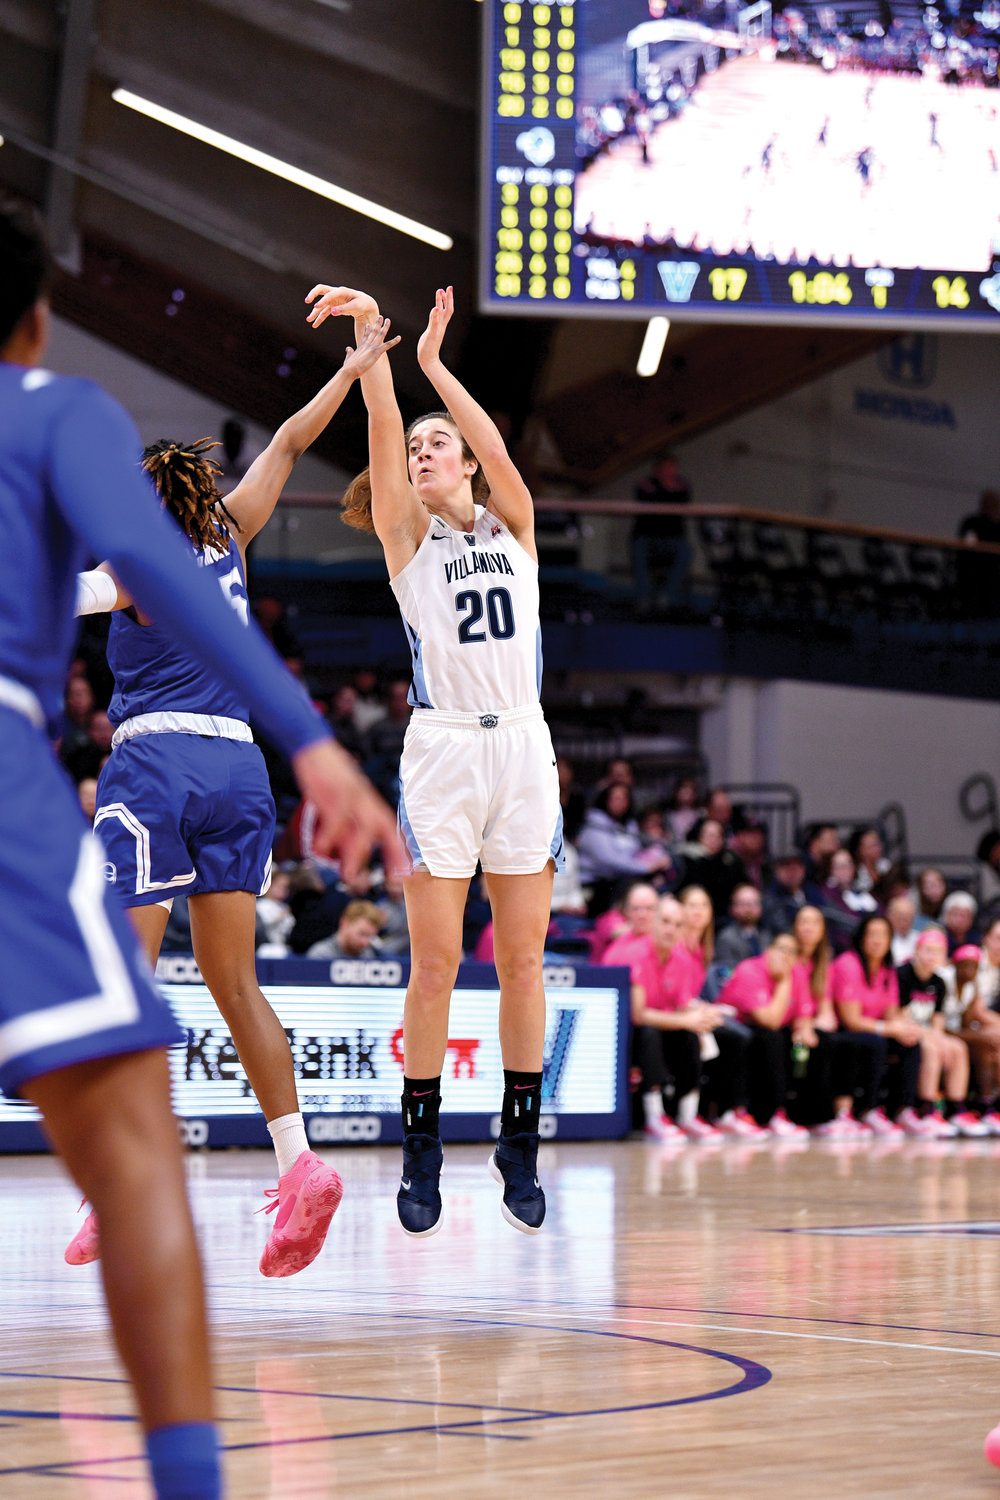 Villanova’s Maddy Siegrist follows through on a jump shot during a Big East Conference game against Seton Hall Feb. 2. The Our Lady of Lourdes High School graduate was named Freshman of the Year in the Big East Conference.